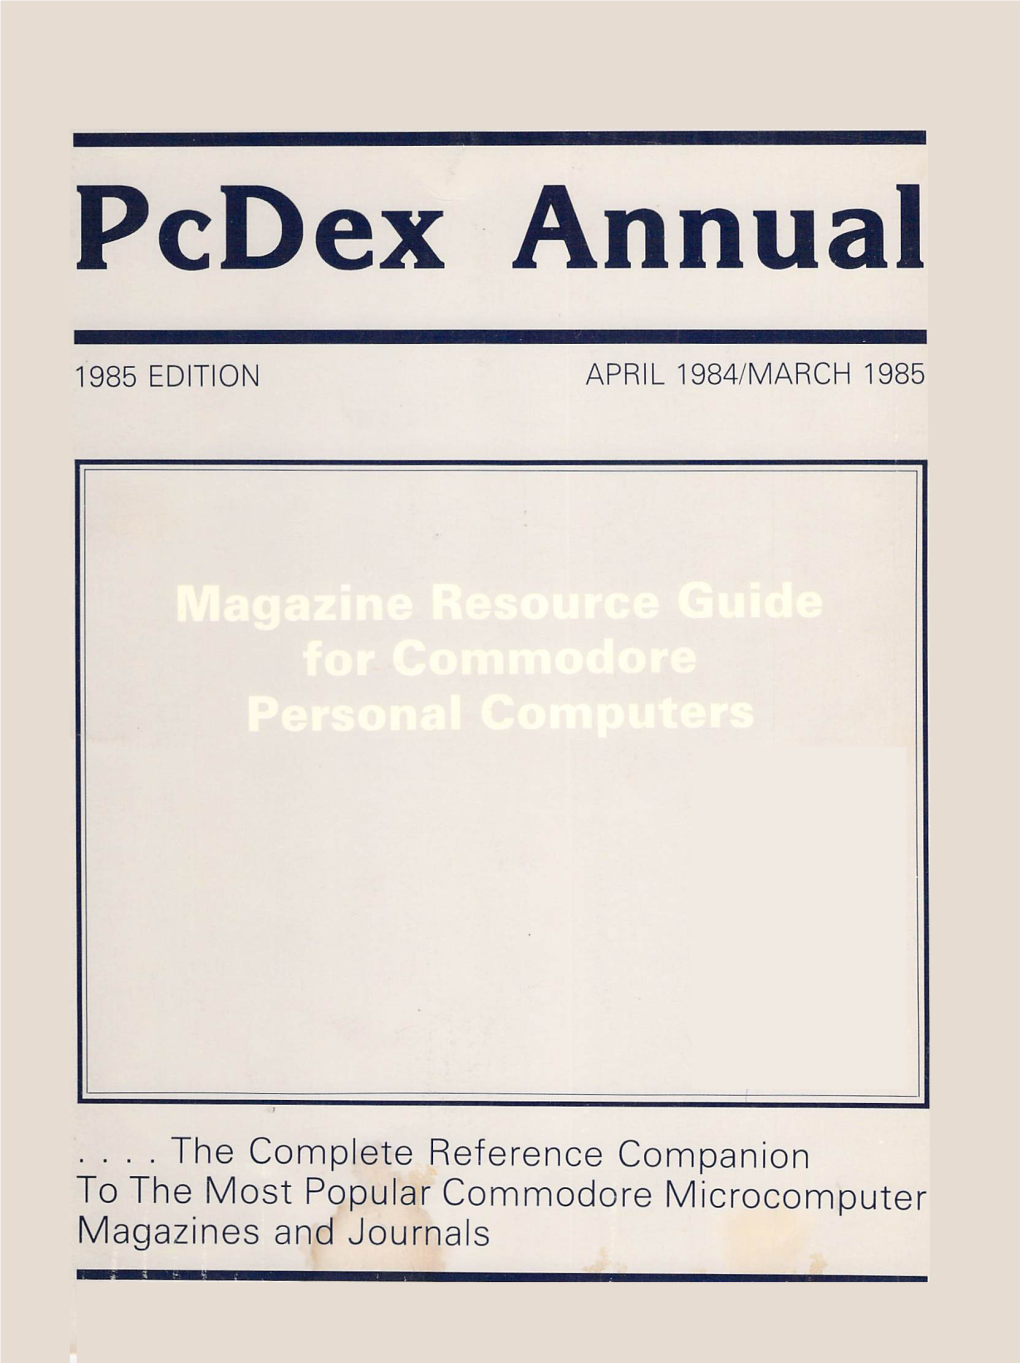 The Complete Reference Companion to the Most Popular Commodore Microcomputer Magazines and Journals